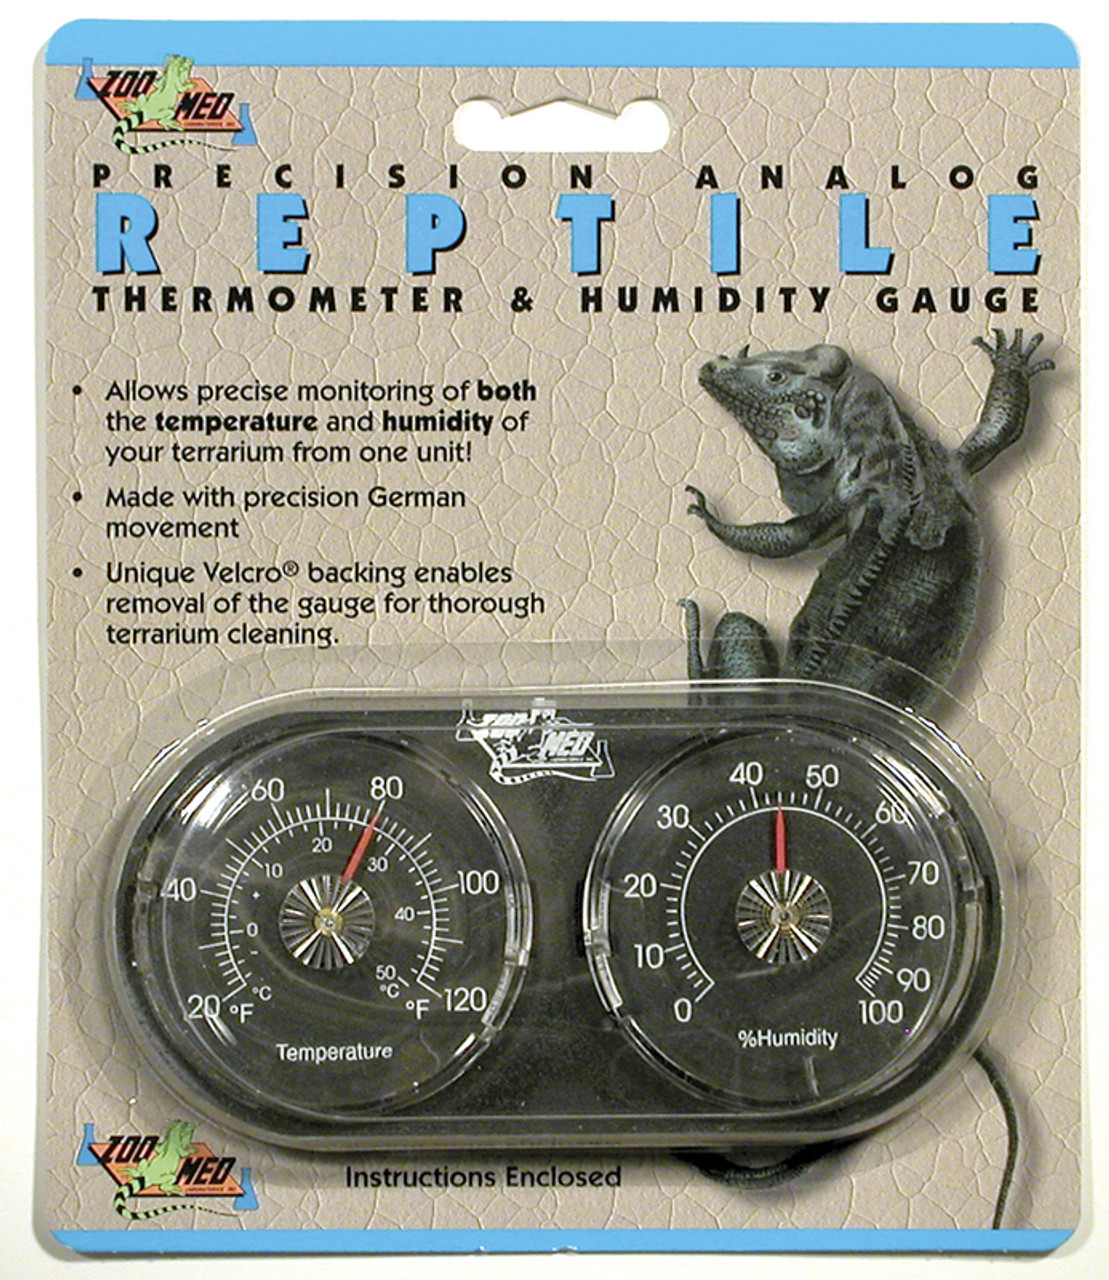 Zoo Med Dual Analog Terrarium Thermometer/Humidity Gauge